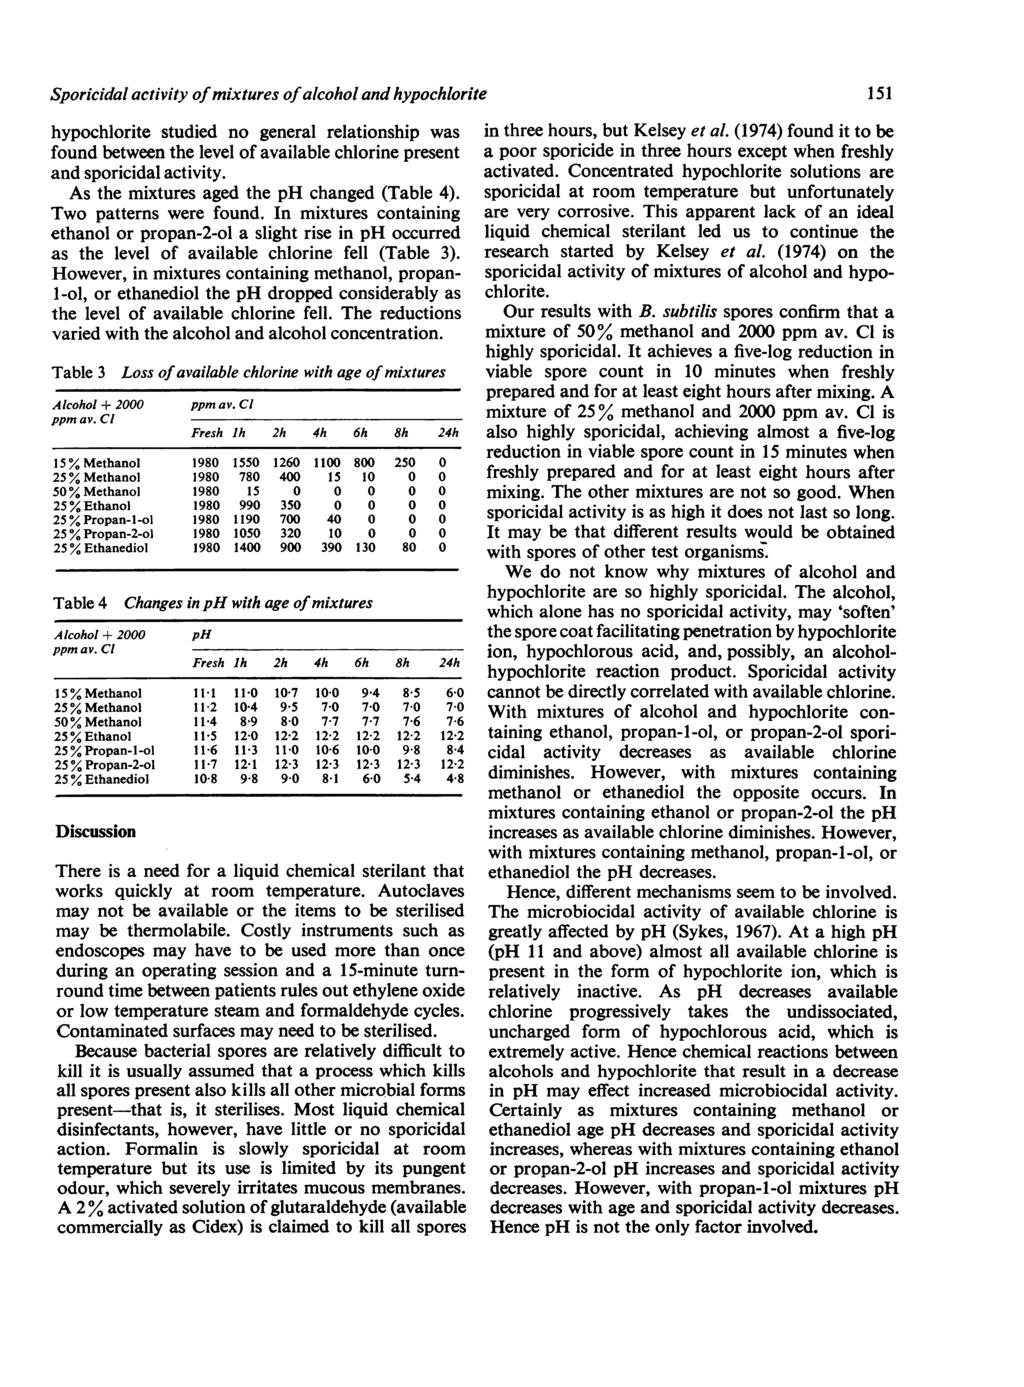 Sporicidal activity ofmixtures ofalcohol and hypochlorite hypochlorite studied no general relationship was found between the level of available chlorine present and sporicidal activity.